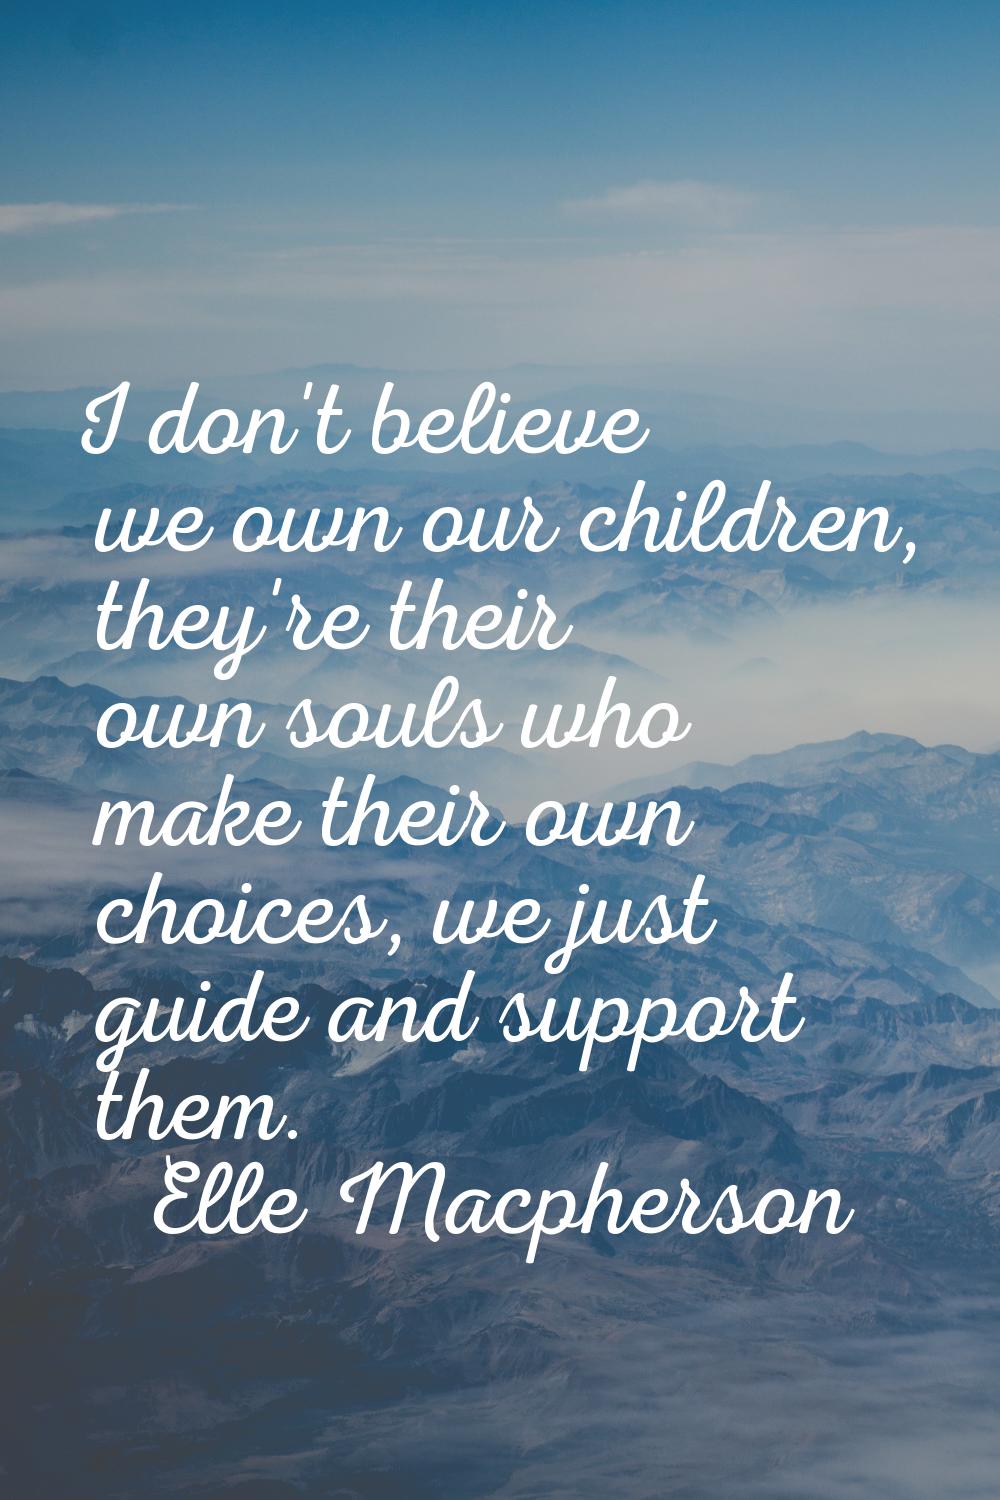 I don't believe we own our children, they're their own souls who make their own choices, we just gu